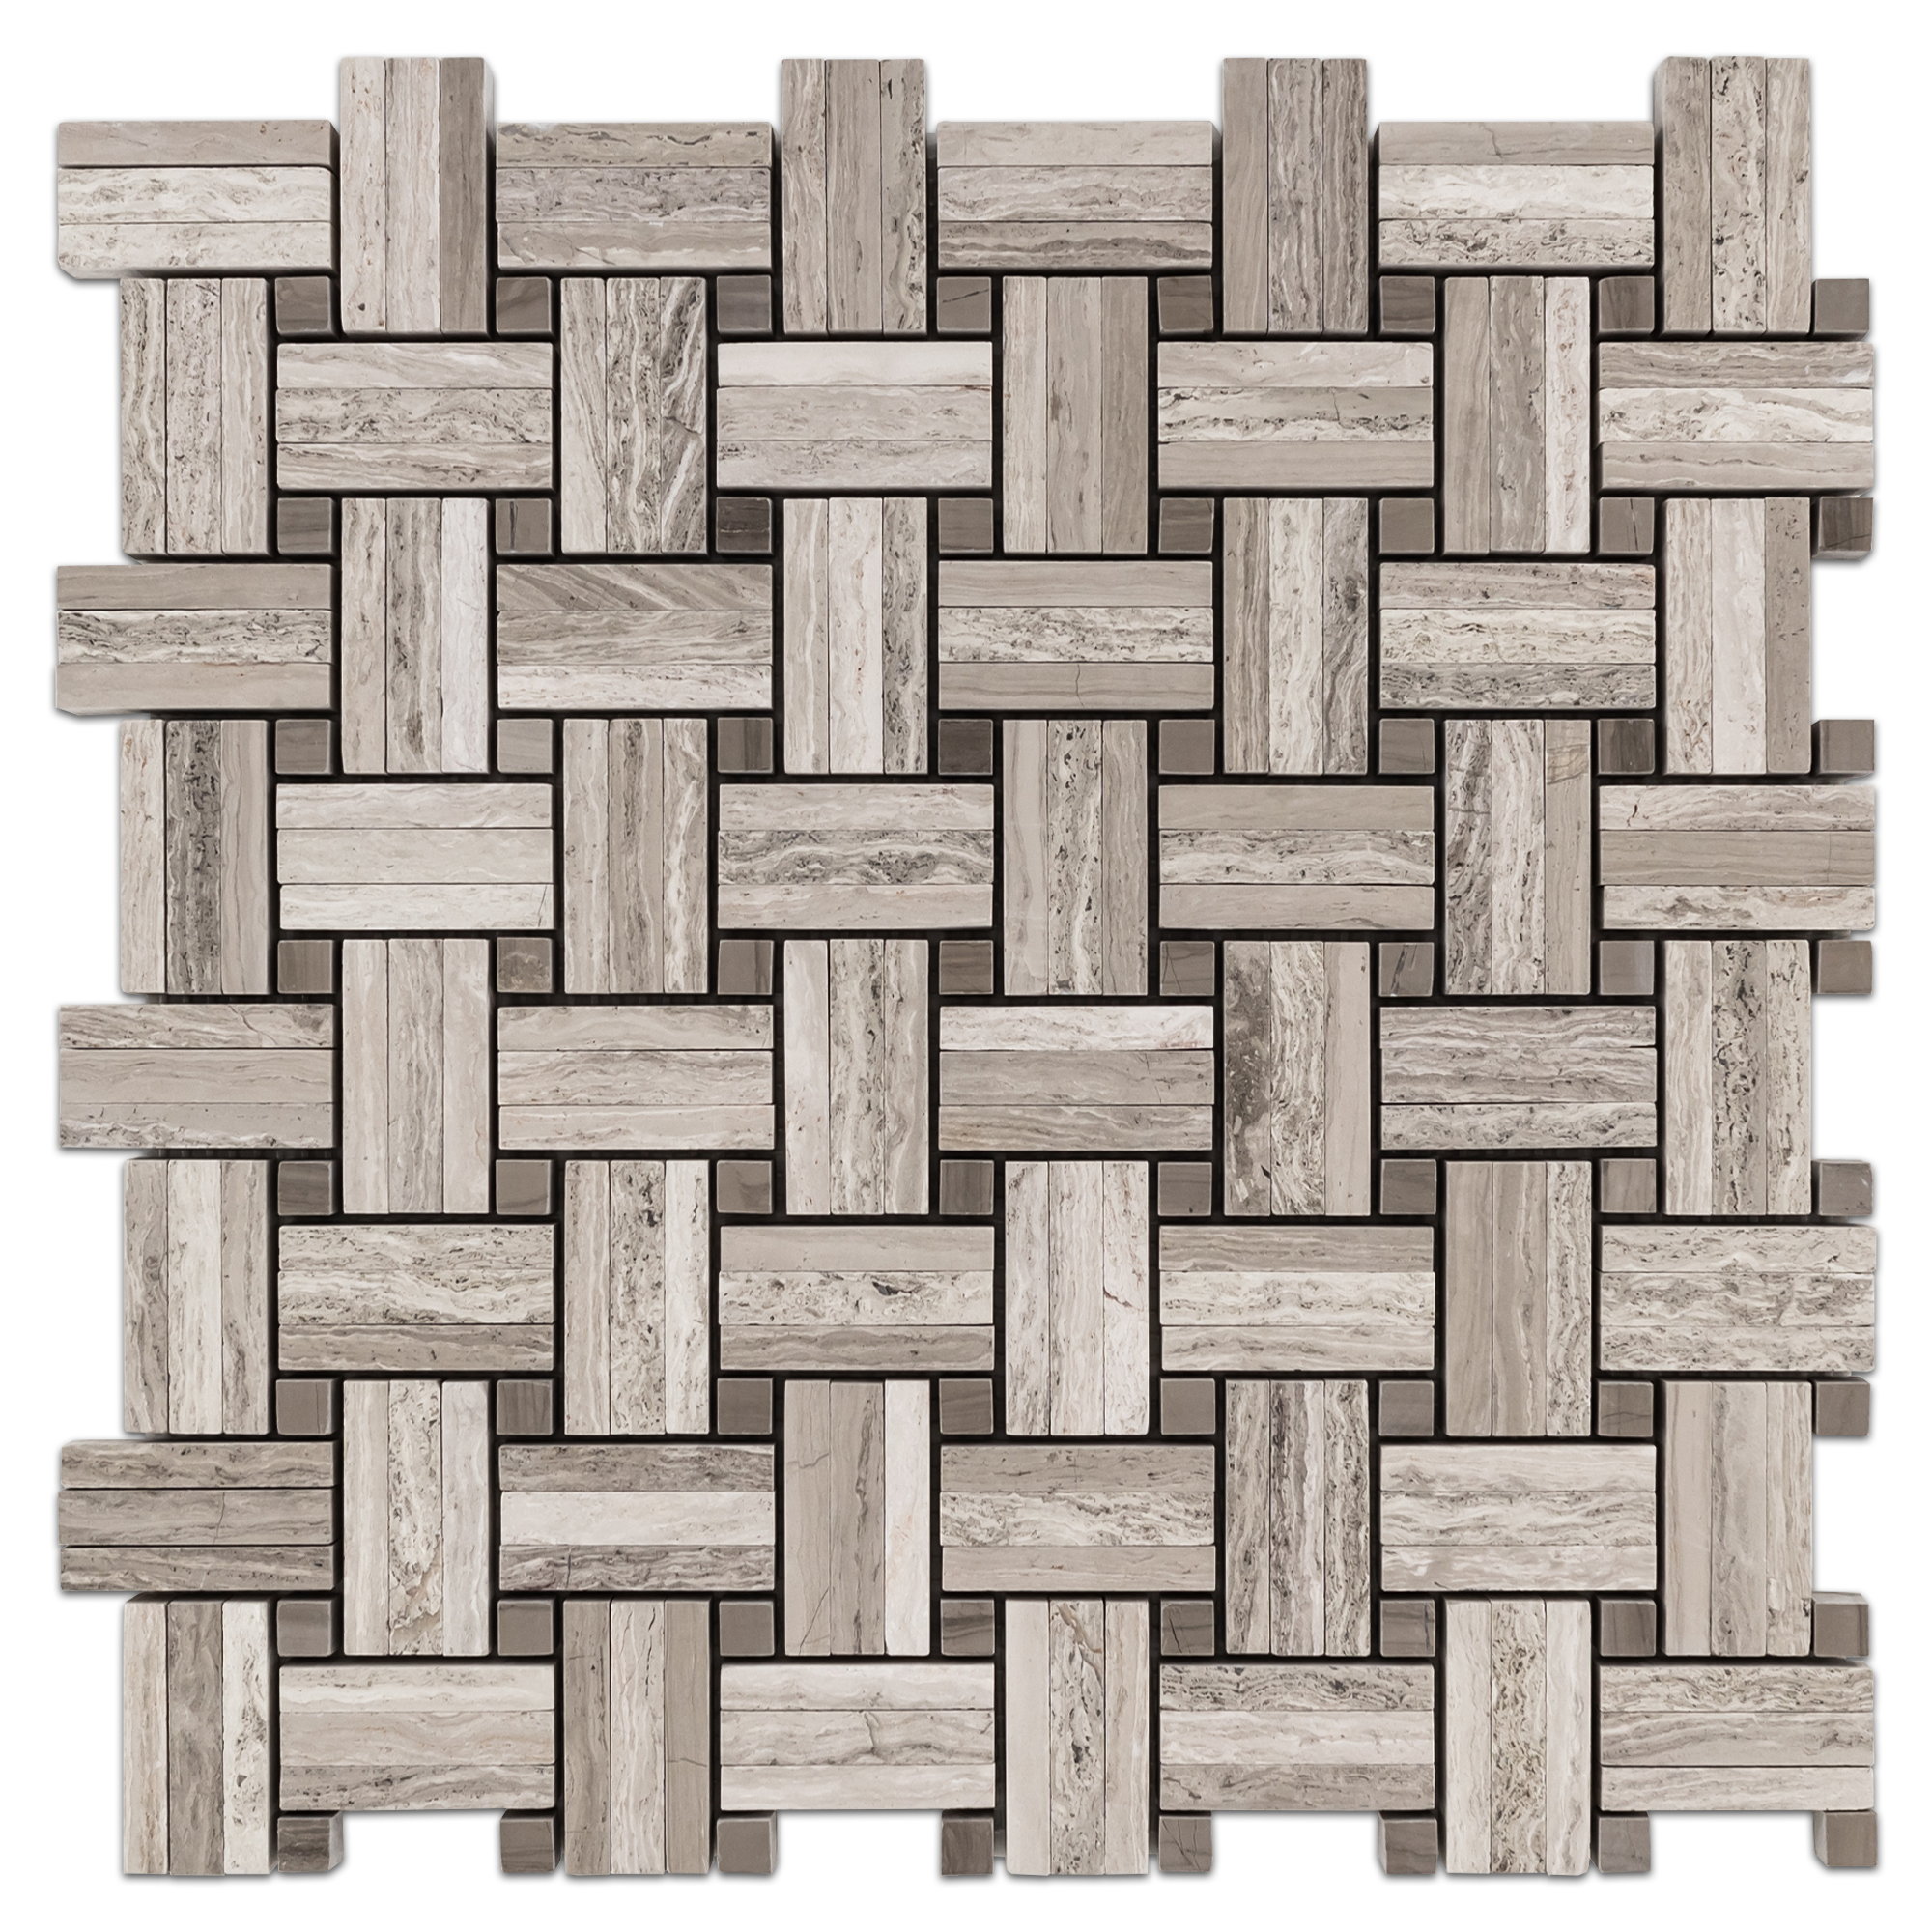 Elon Beachwood Driftwood Marble Tri-Weave Basketweave Field Mosaic Tile, 12x12 inch Honed Finish, for Flooring and Wall Decor